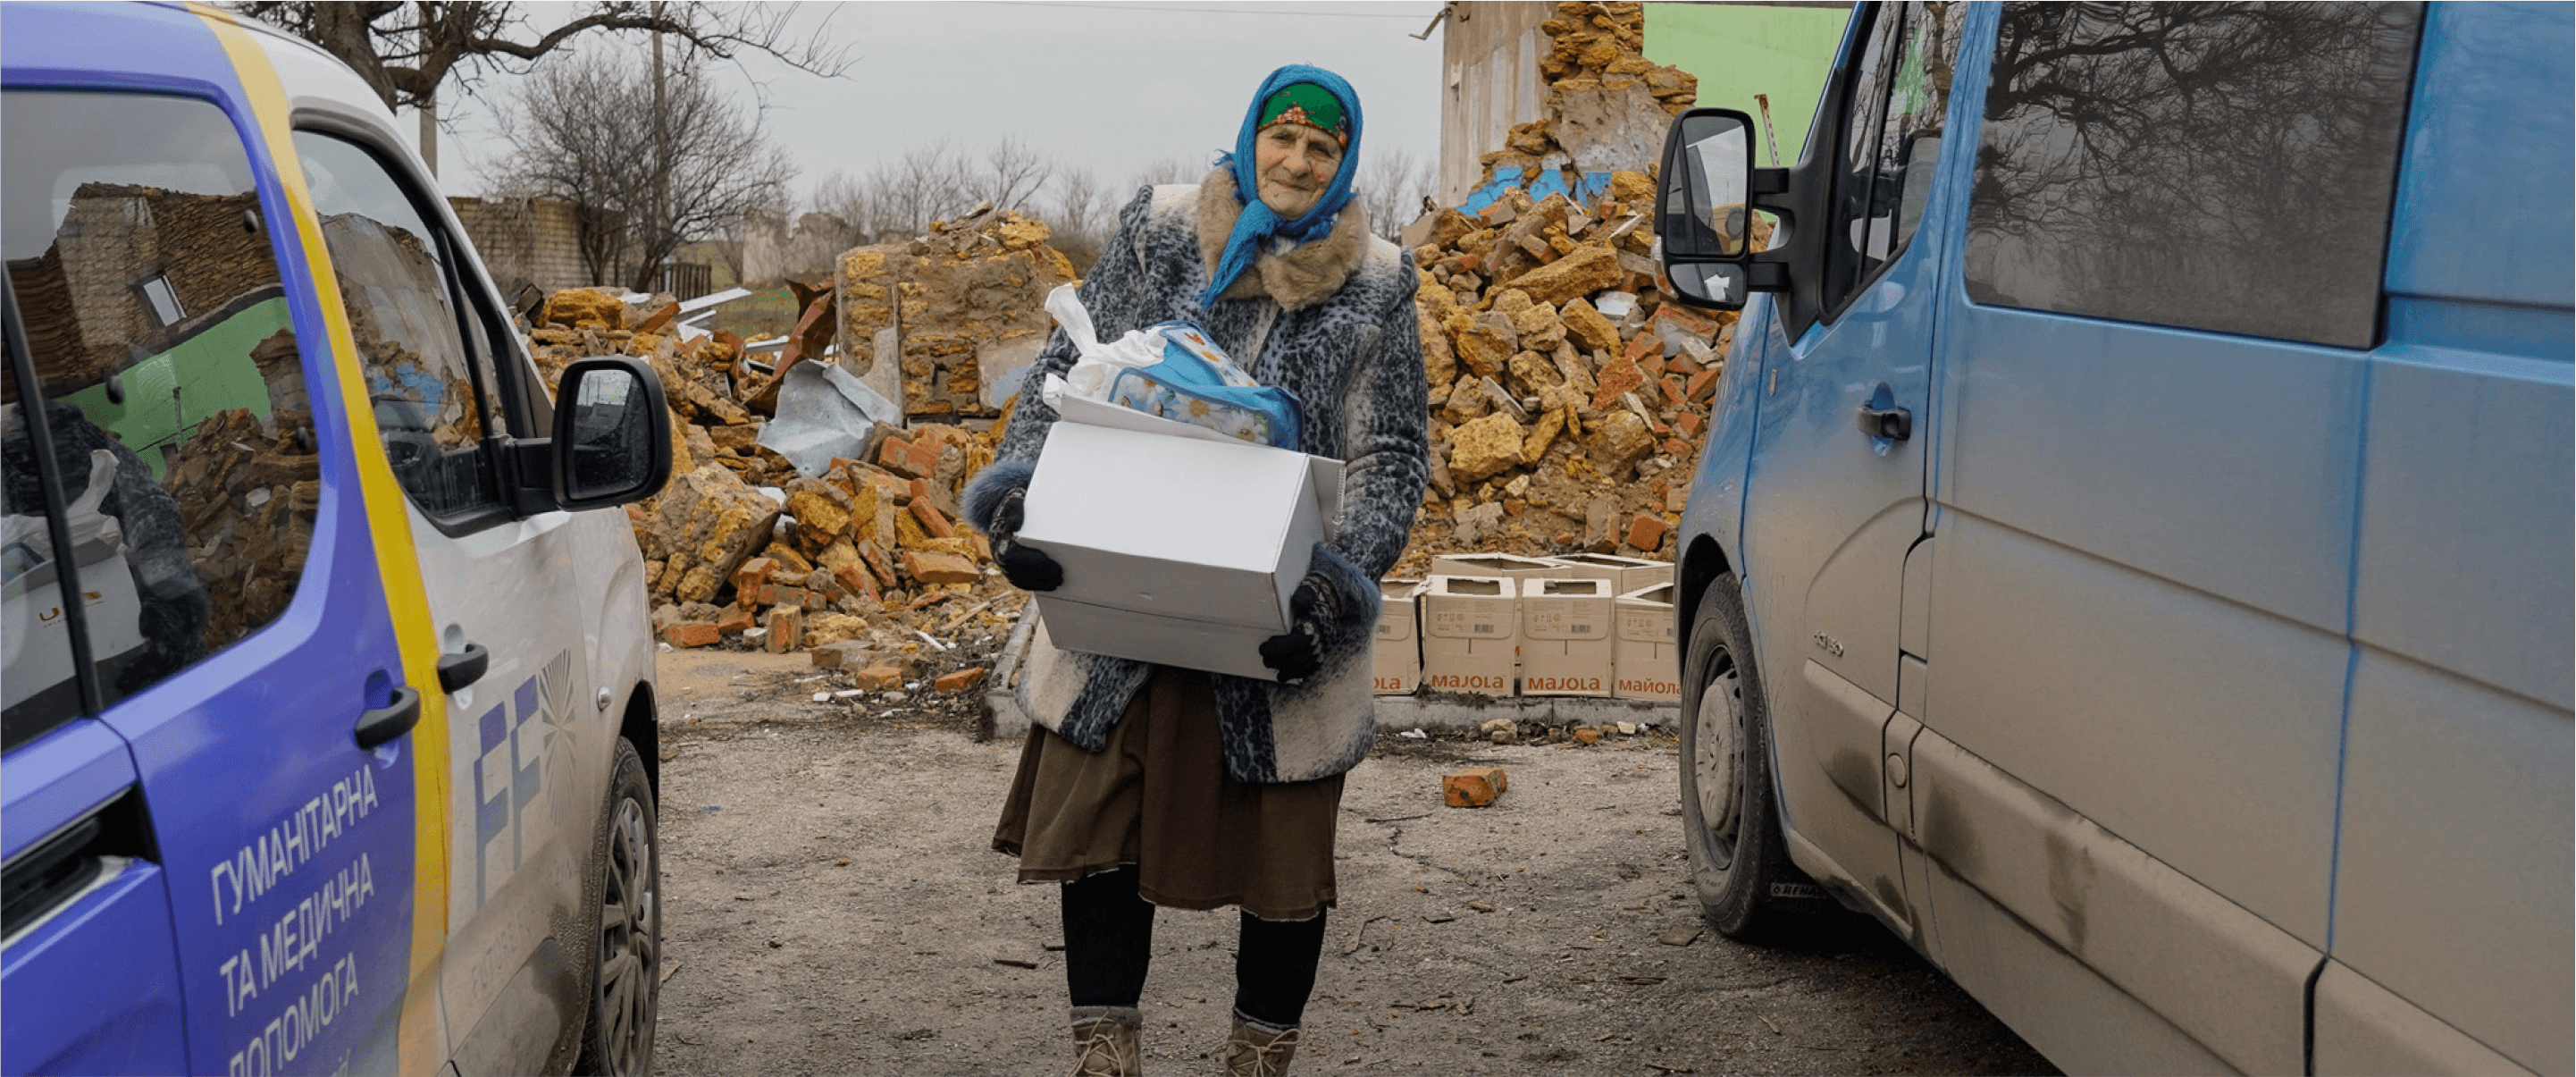 Humanitarian mission to Kherson region on February 22-23